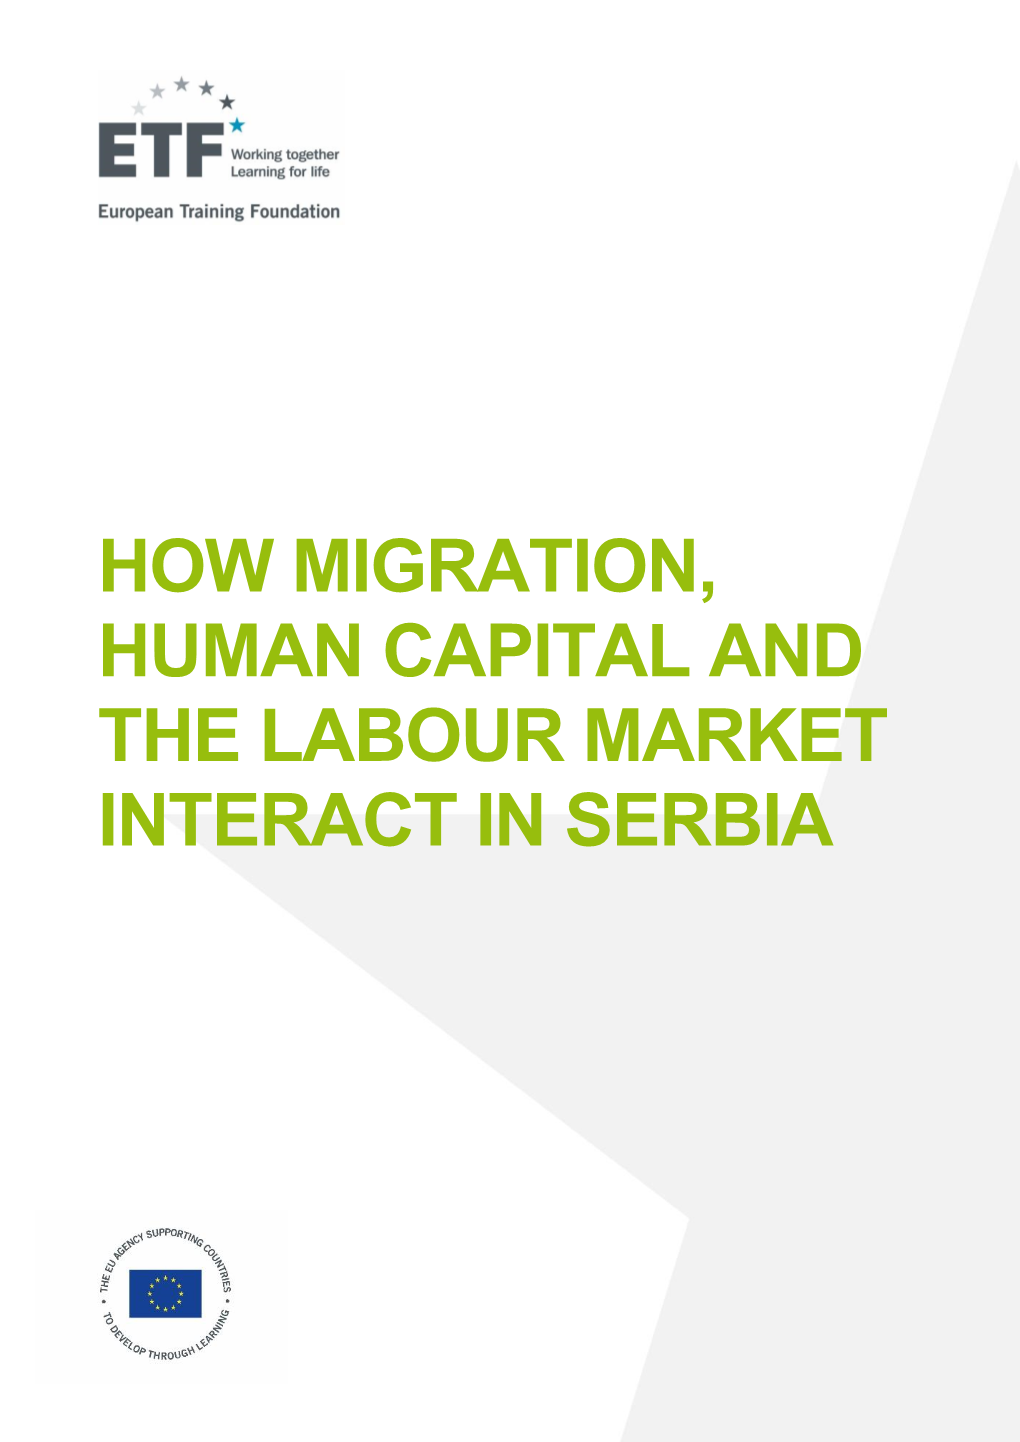 Migration, Human Capital and the Labour Market in Serbia